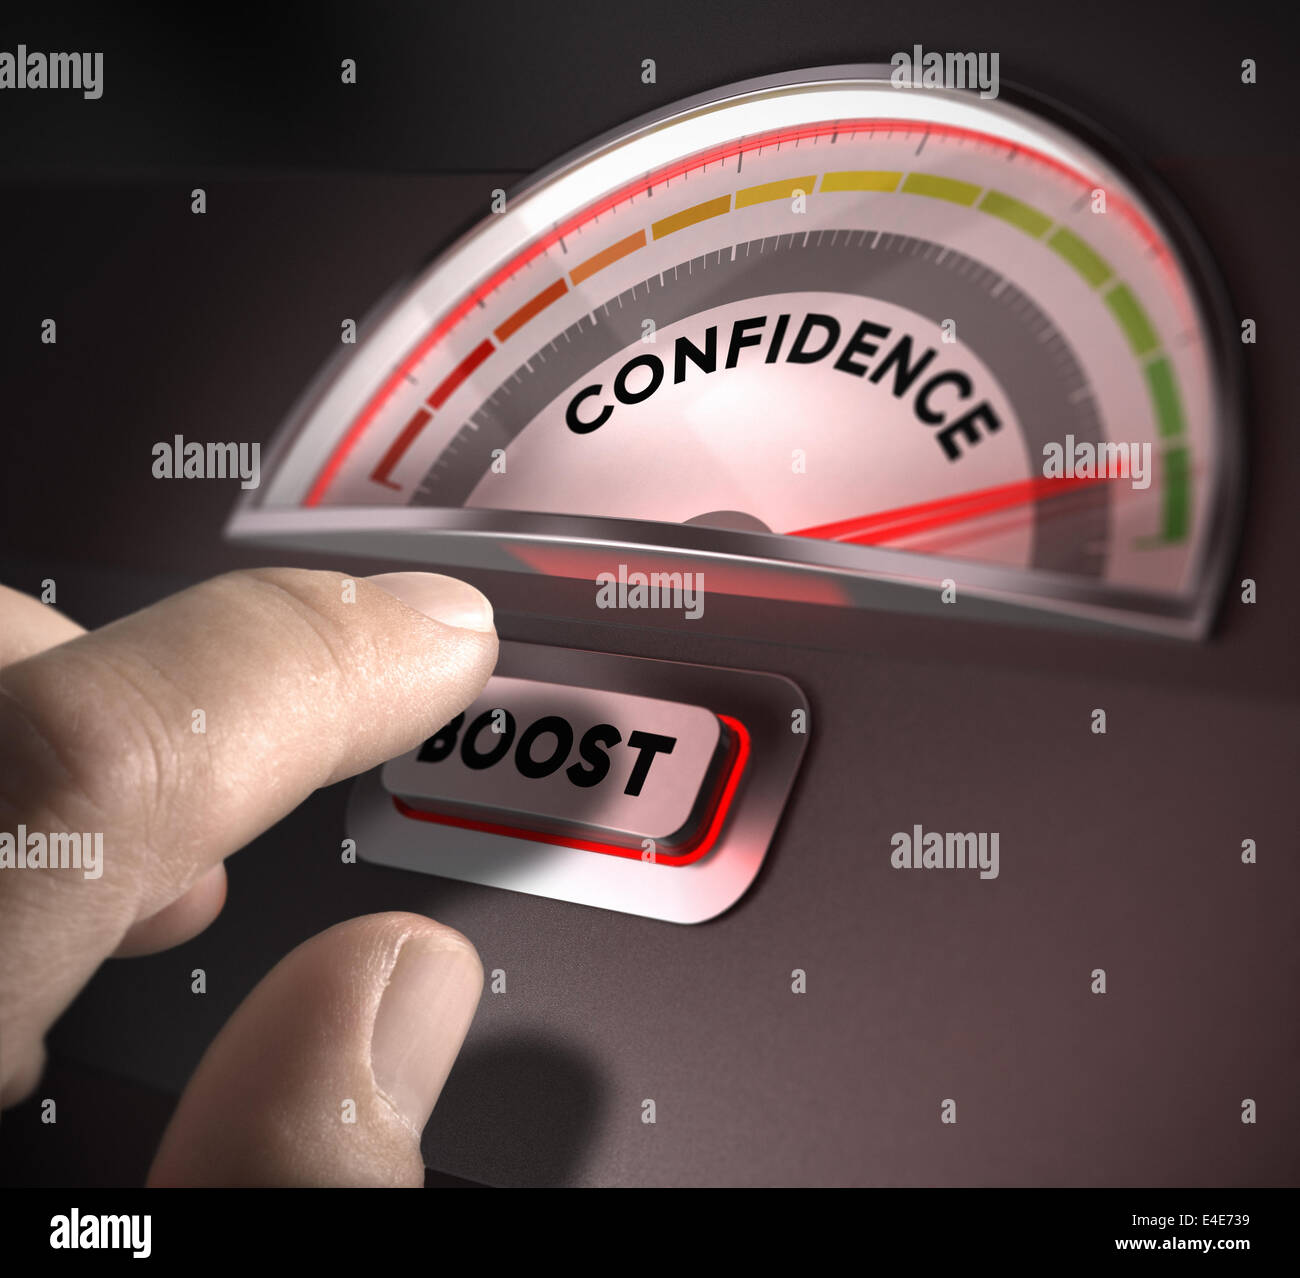 confidence indicator dial, index and boost button over a dark background. Illustration of self-confidence or esteem Stock Photo